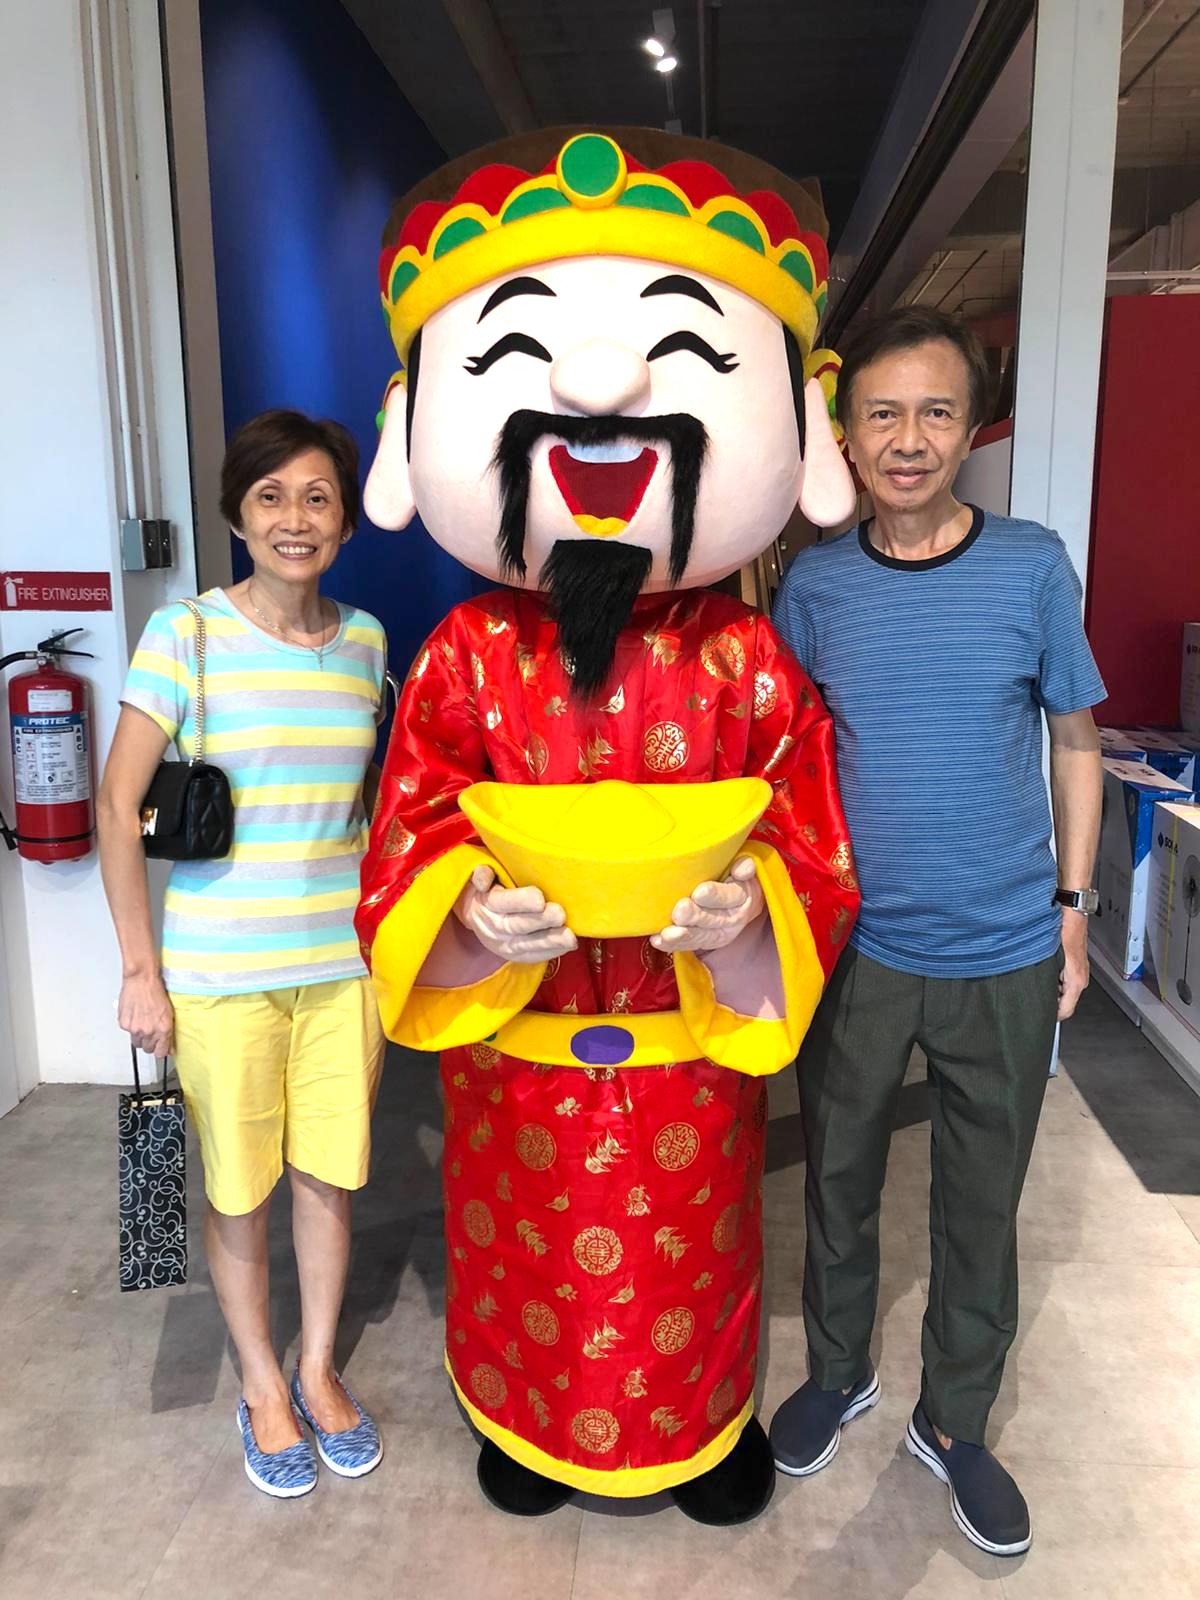 Chinese New Year Cai shen ye mascot for events Singapore